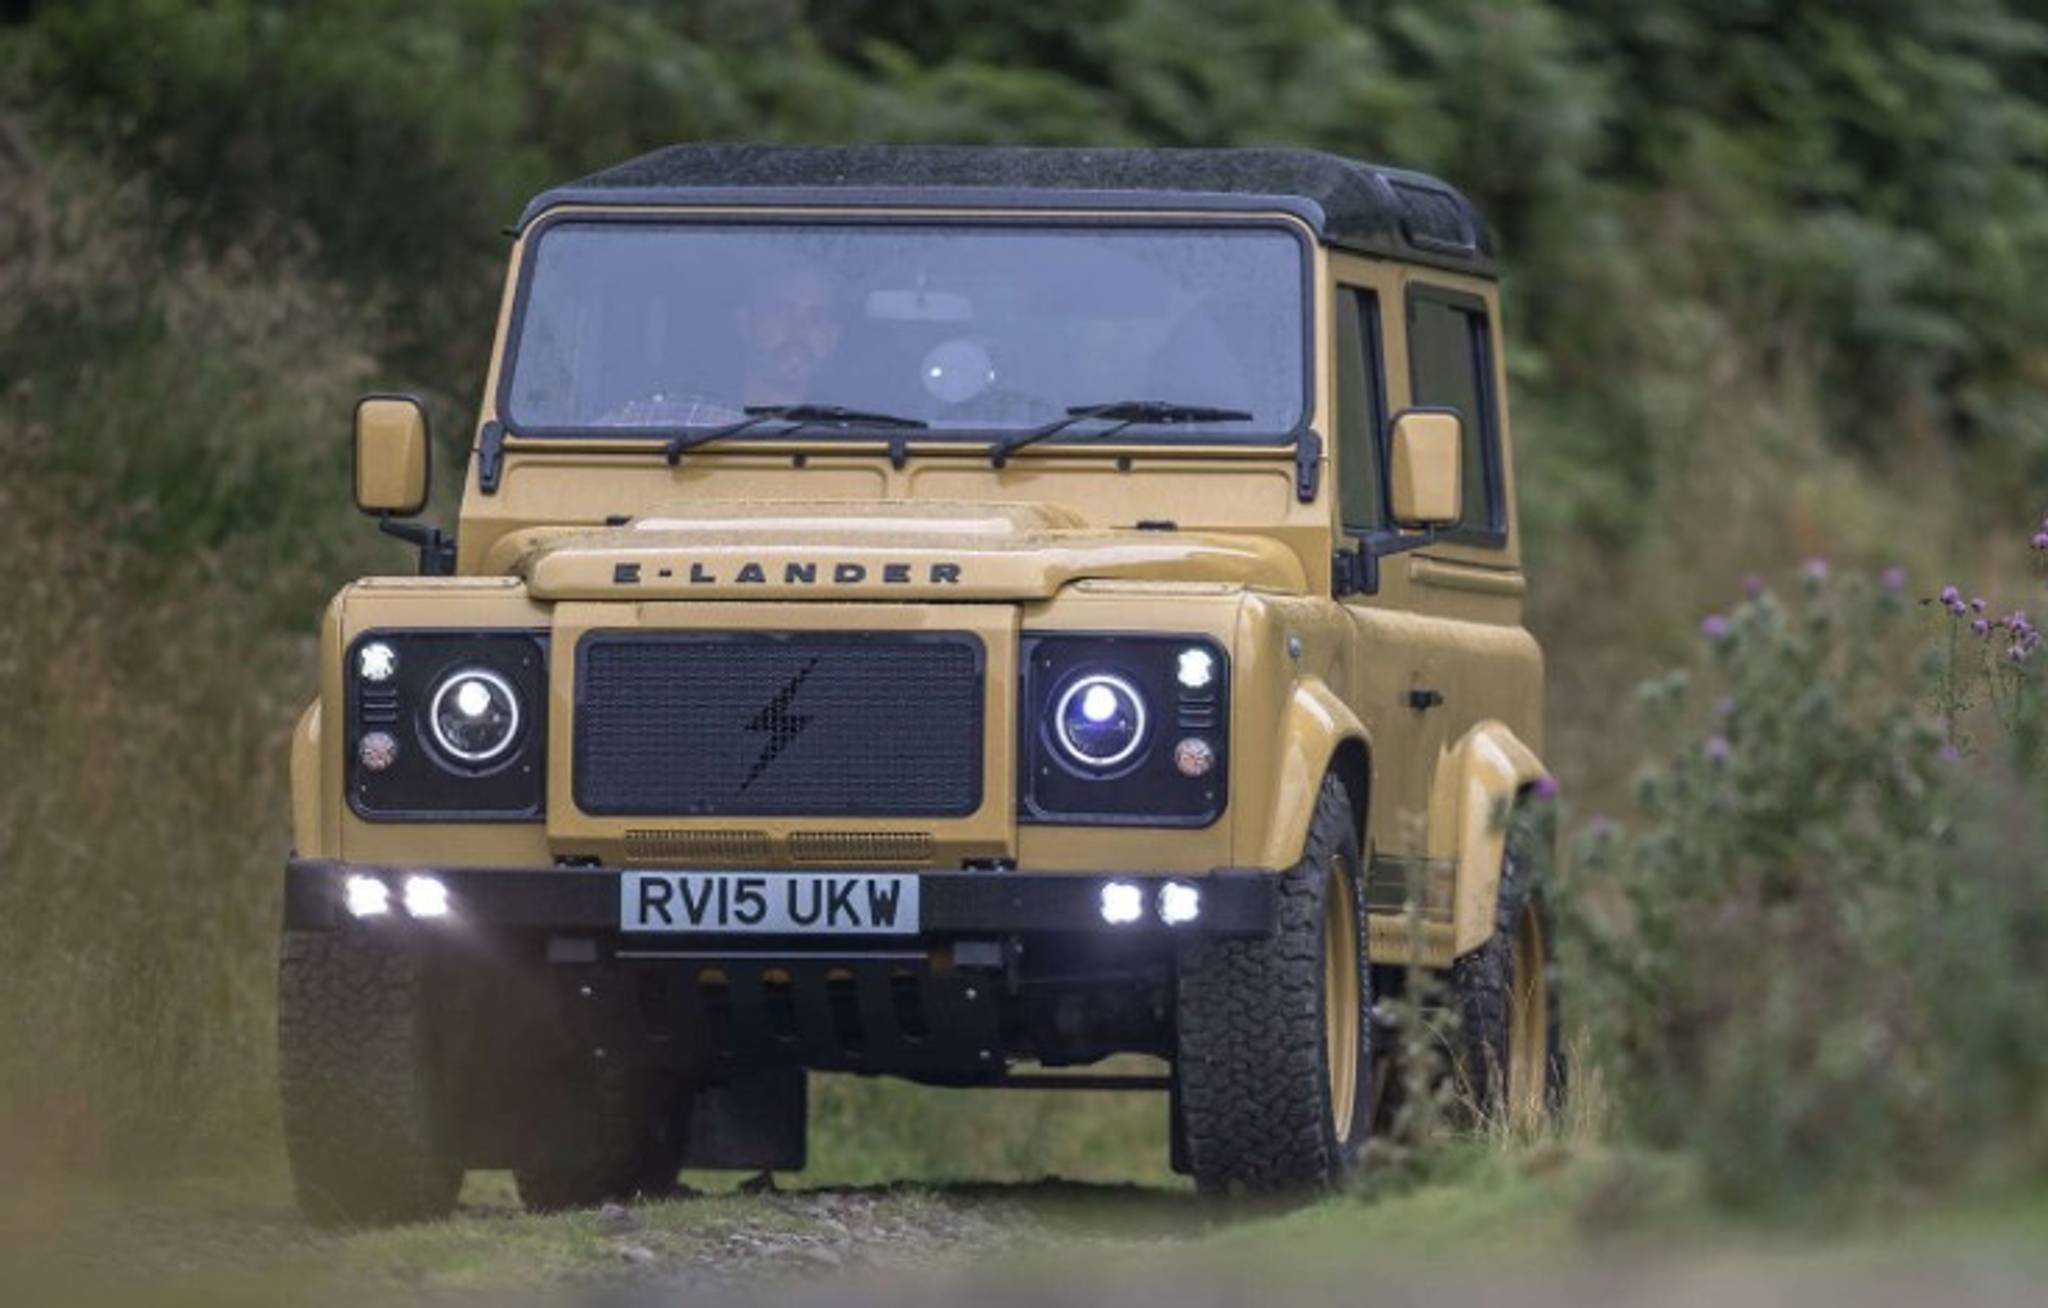 Barbour Land Rover gives driving a luxury appeal